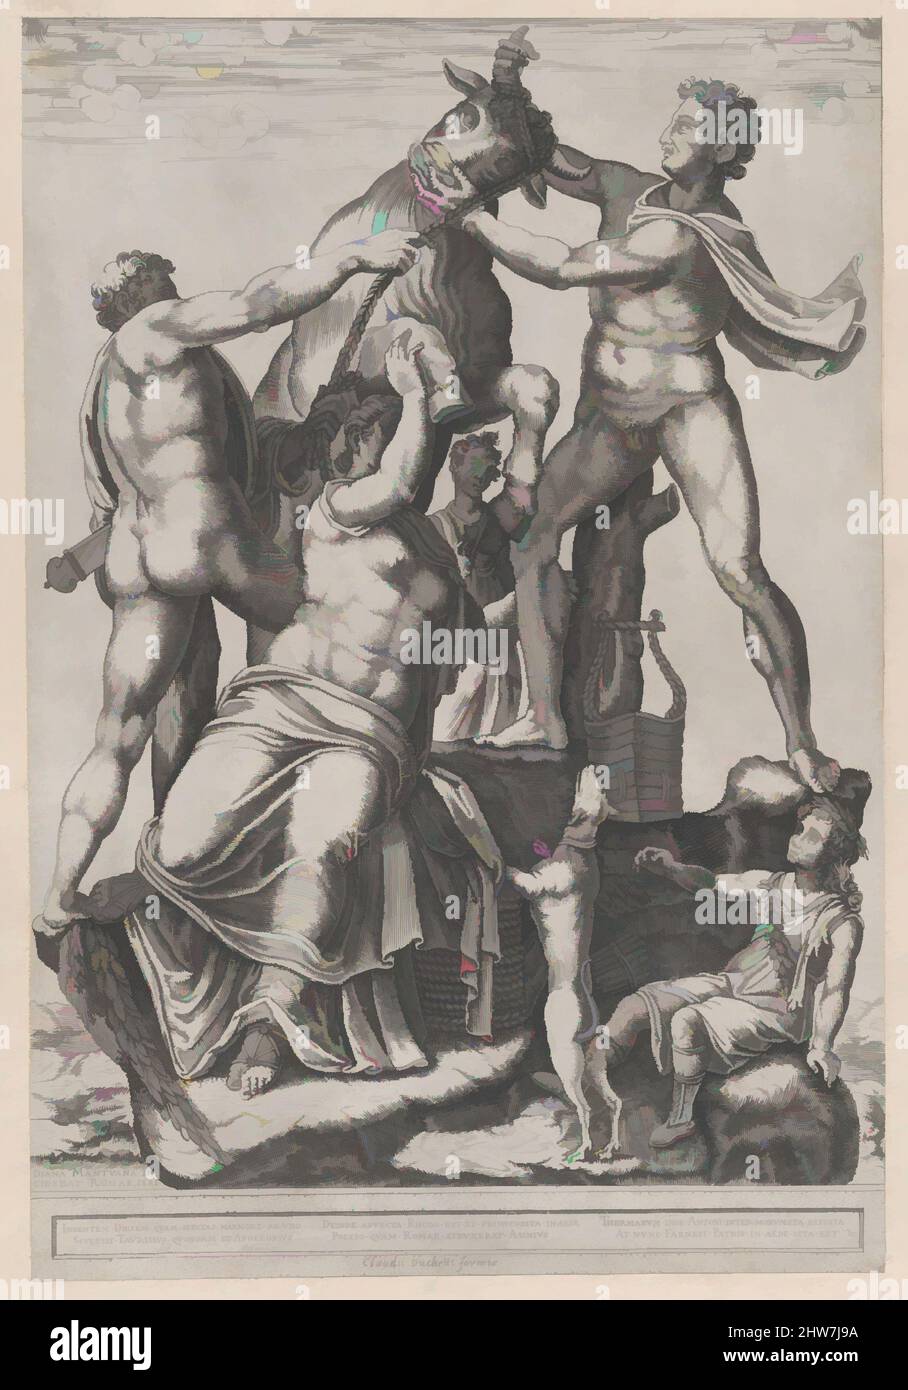 Art inspired by Speculum Romanae Magnificentiae: Amphion and Zethus Tying Dirce to a Wild Bull The Farnese Bull, 1581, Engraving, sheet: 18 1/8 x 13 9/16 in. (46 x 34.4 cm), Prints, Diana Scultori (Italian, Mantua ca. 1535?–after 1588 Rome, Classic works modernized by Artotop with a splash of modernity. Shapes, color and value, eye-catching visual impact on art. Emotions through freedom of artworks in a contemporary way. A timeless message pursuing a wildly creative new direction. Artists turning to the digital medium and creating the Artotop NFT Stock Photo